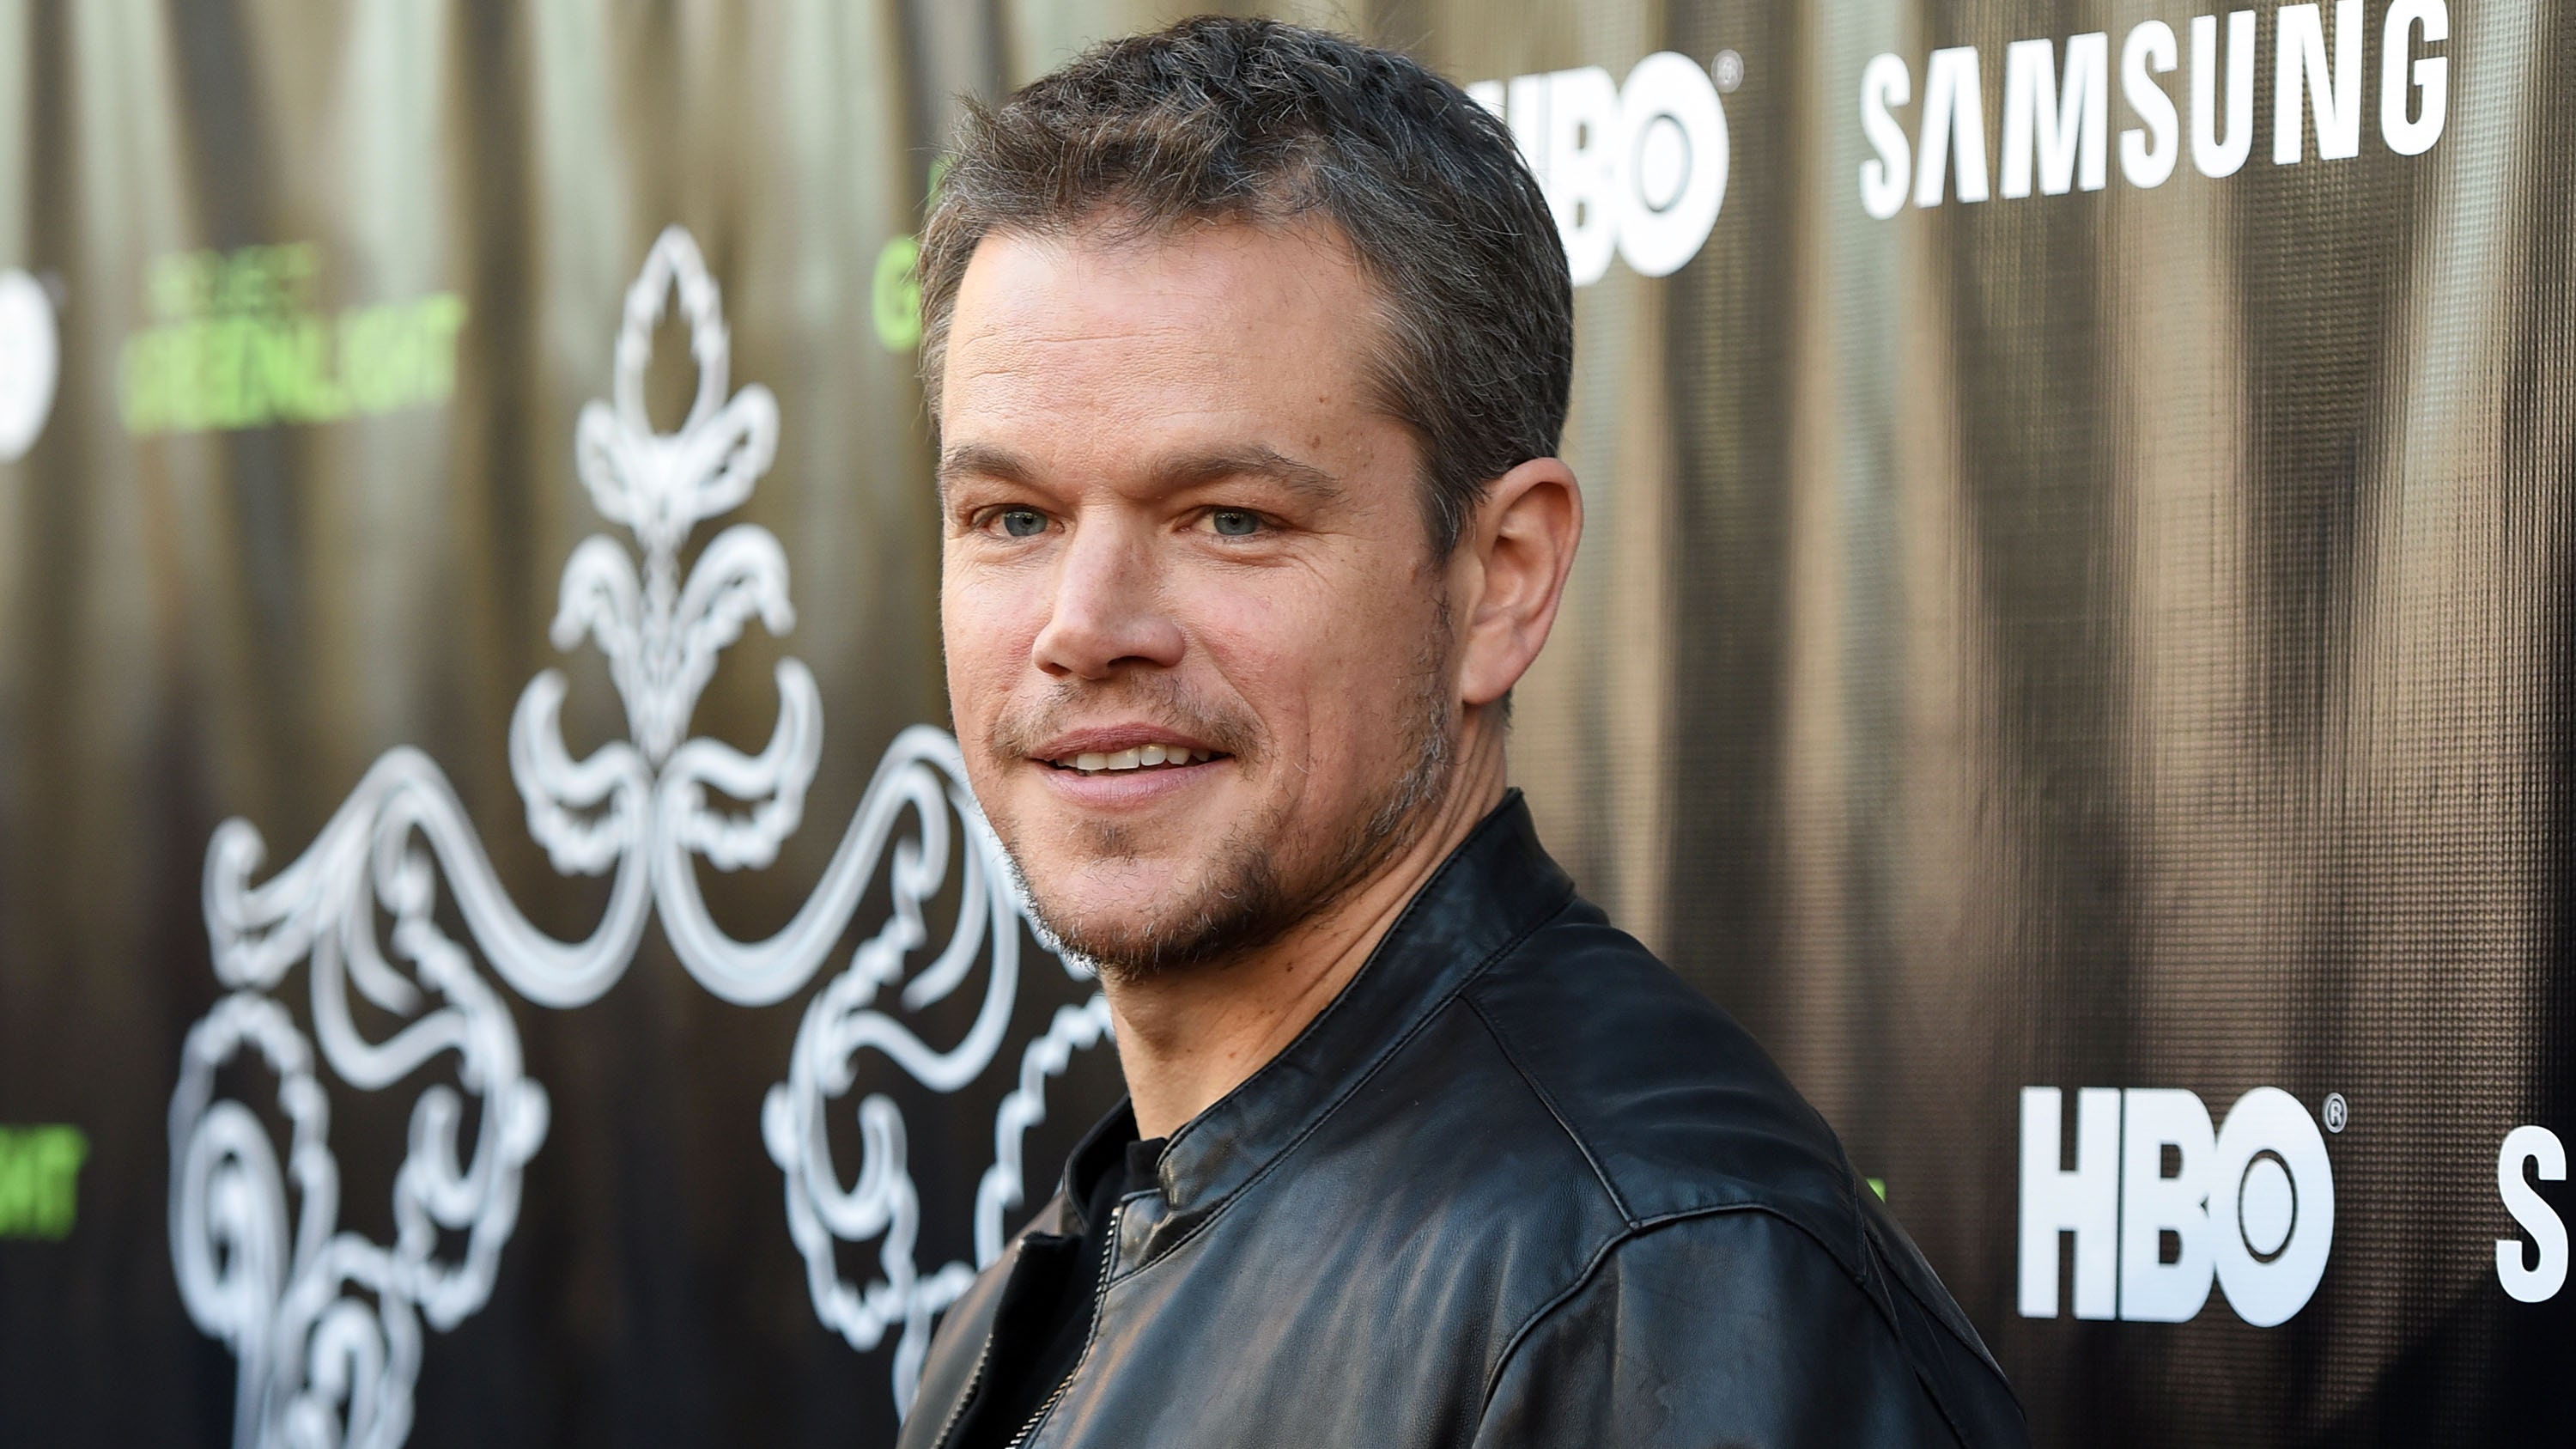 Matt Damon reveals famous role he passed on, how much he would have been paid